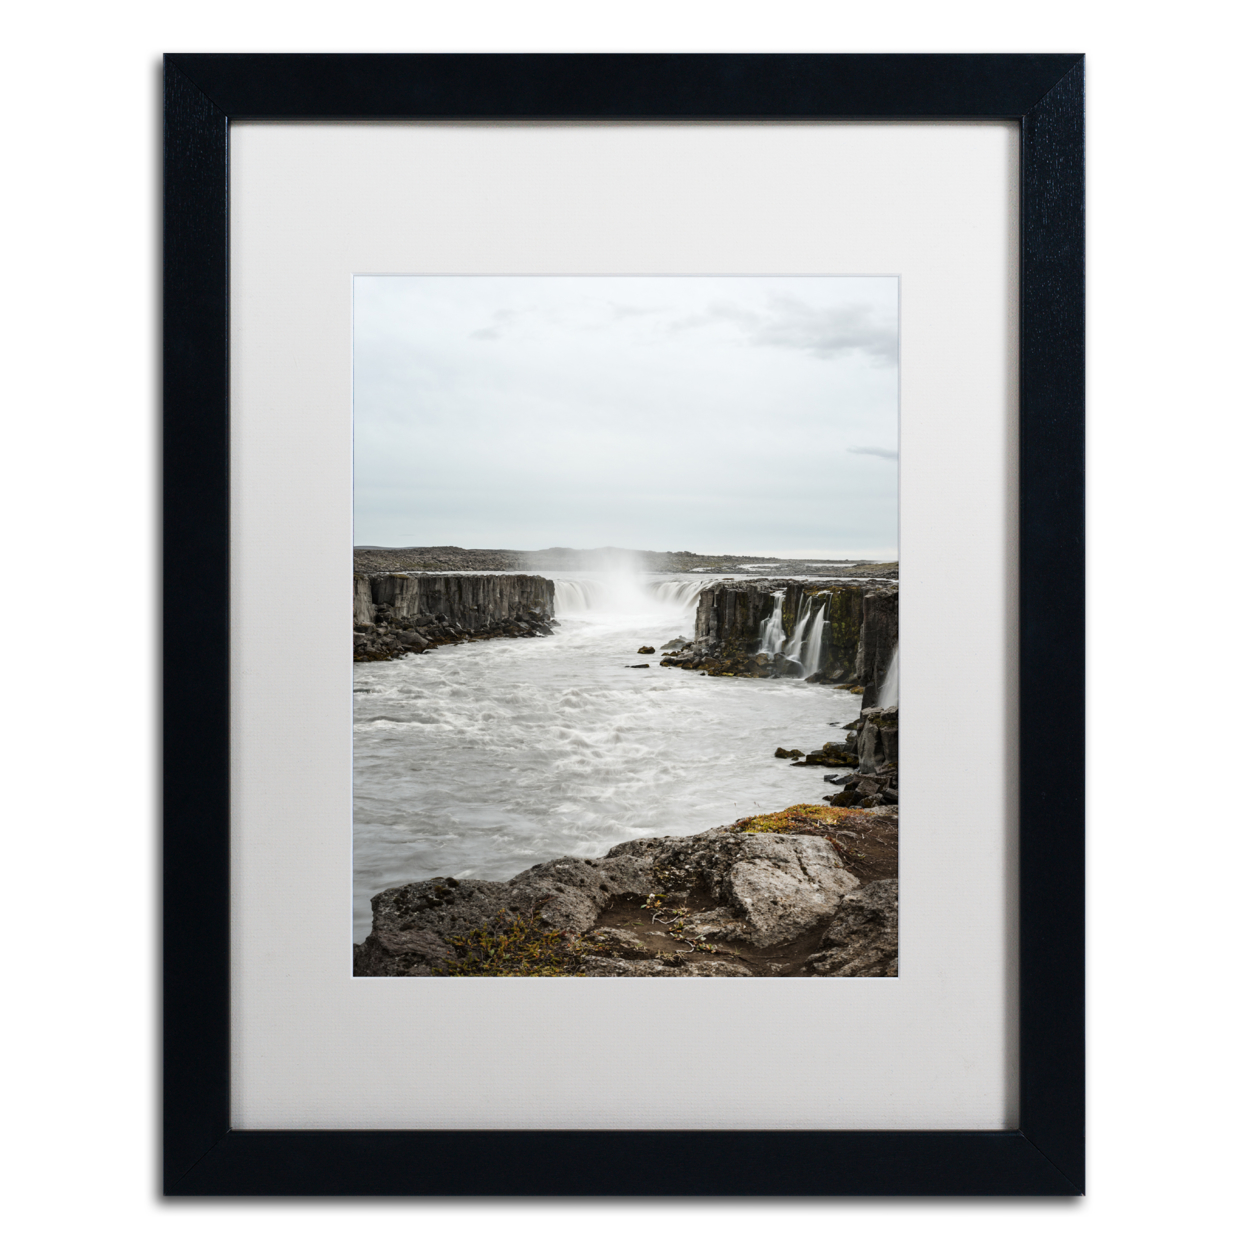 Philippe Sainte-Laudy 'Dettifoss' Black Wooden Framed Art 18 X 22 Inches